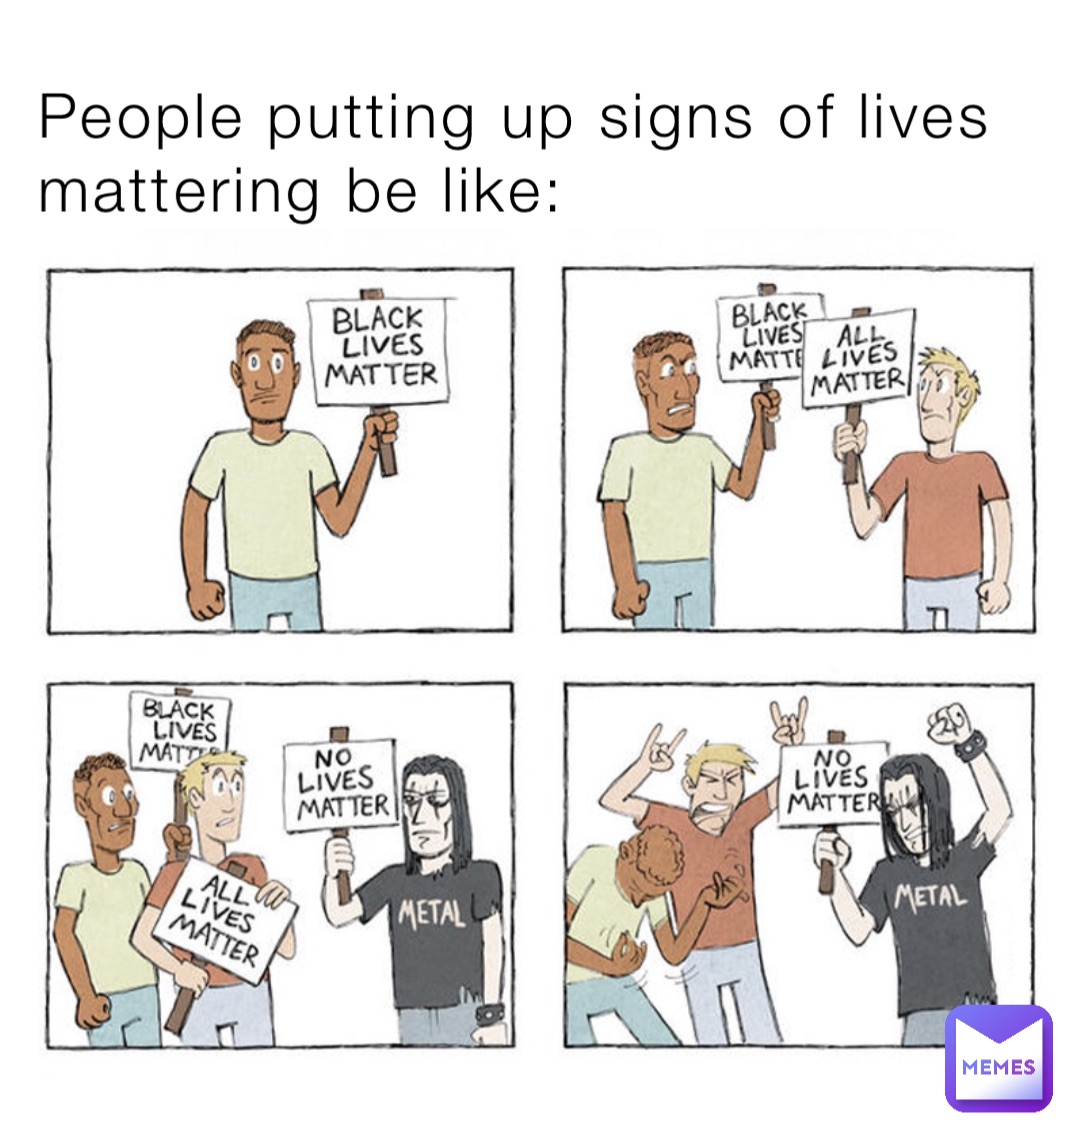 people-putting-up-signs-of-lives-mattering-be-like-yoboimememan-memes